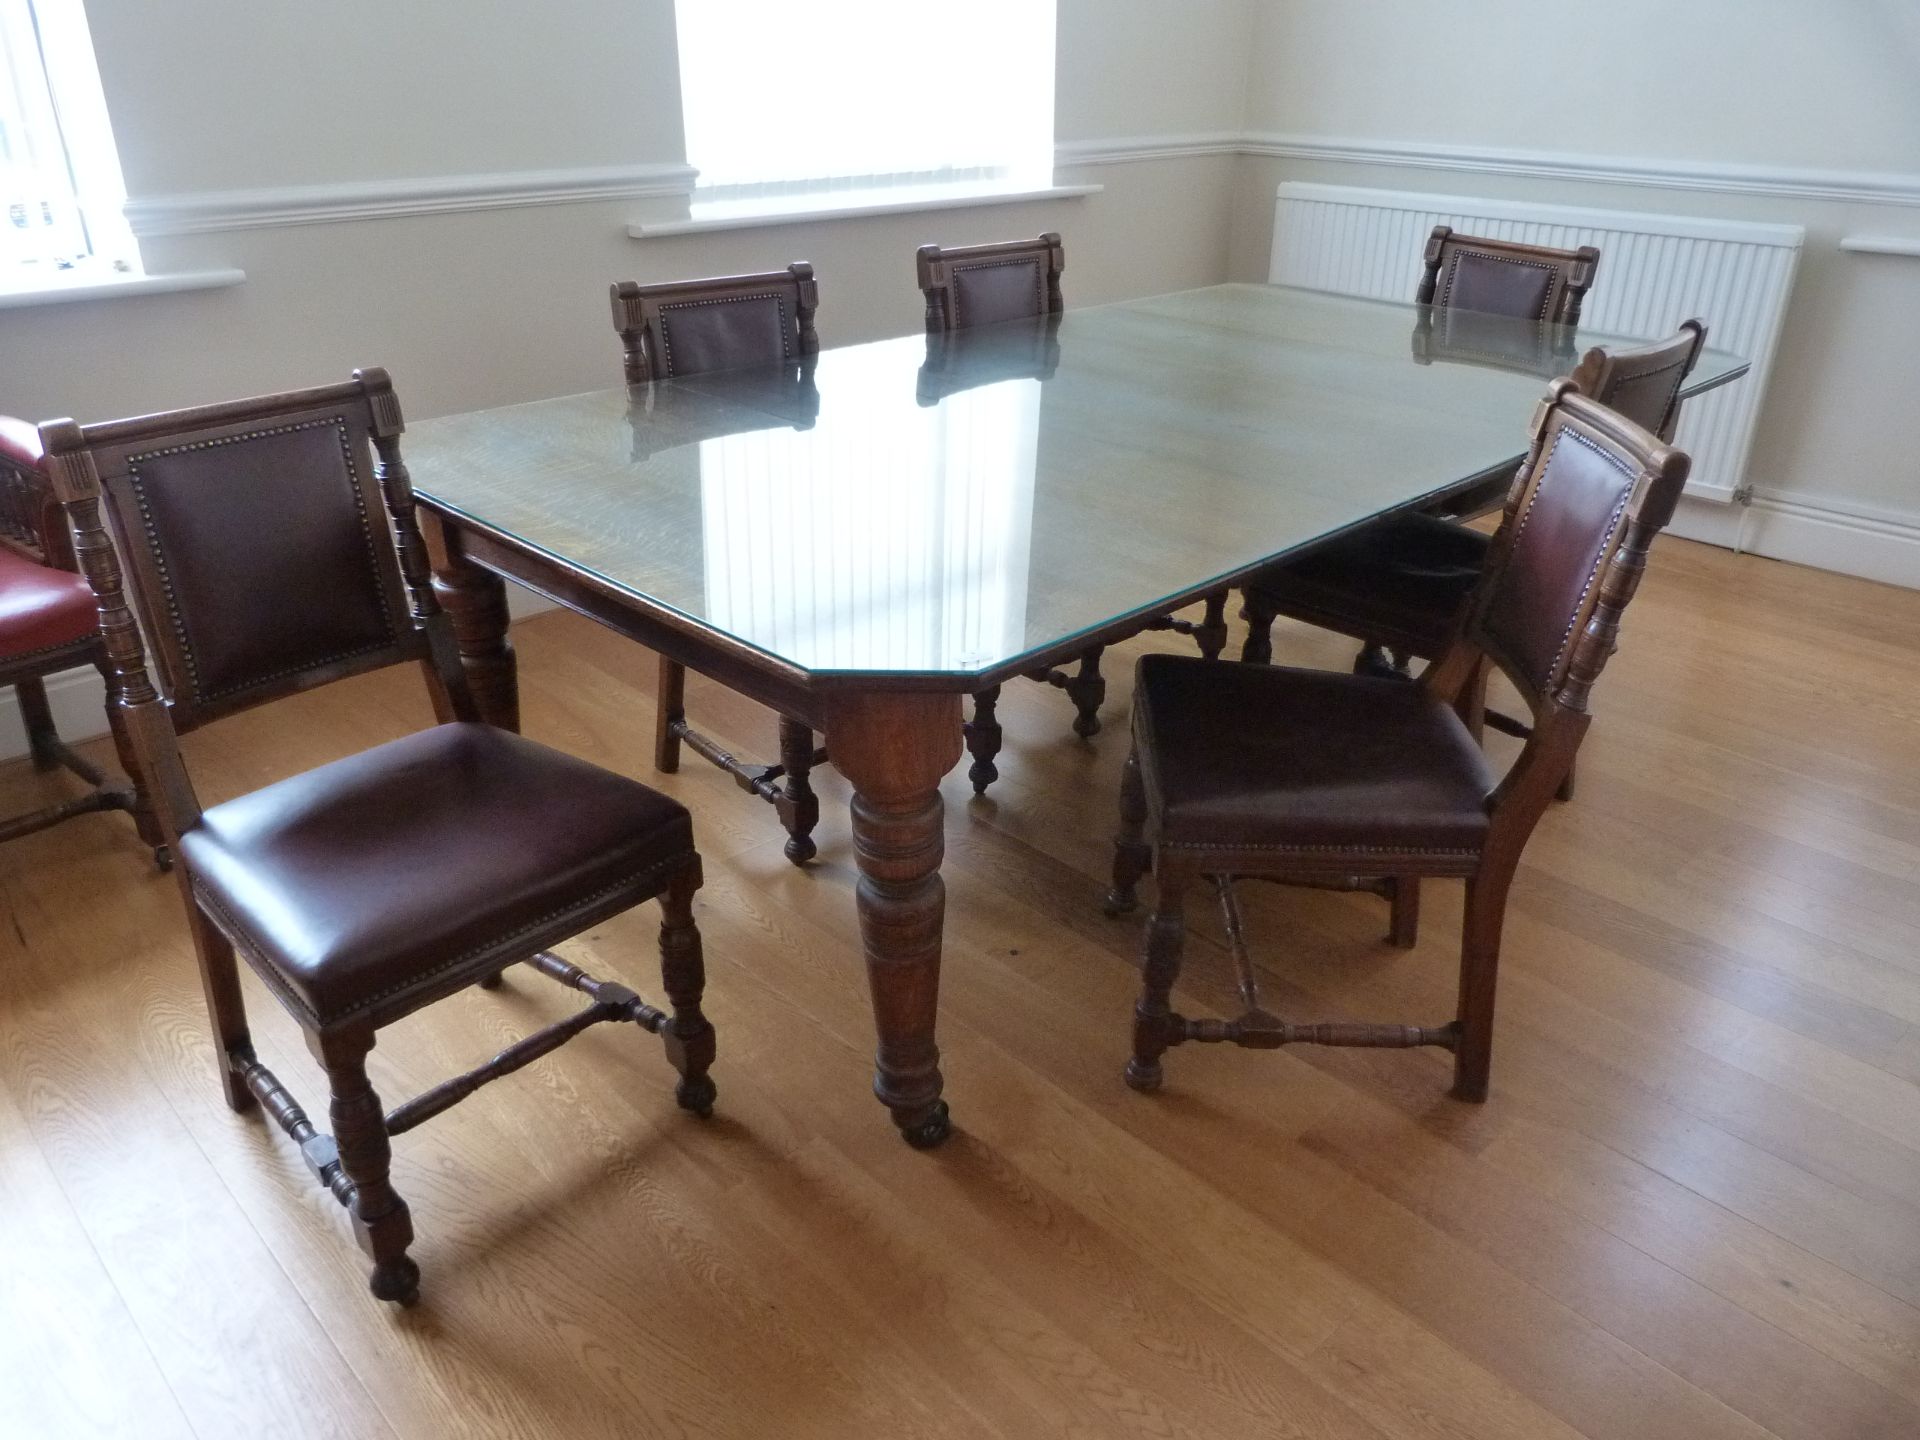 *Edwardian Style Segmented Boardroom Table and Six Chairs with Brown Leather Upholstery